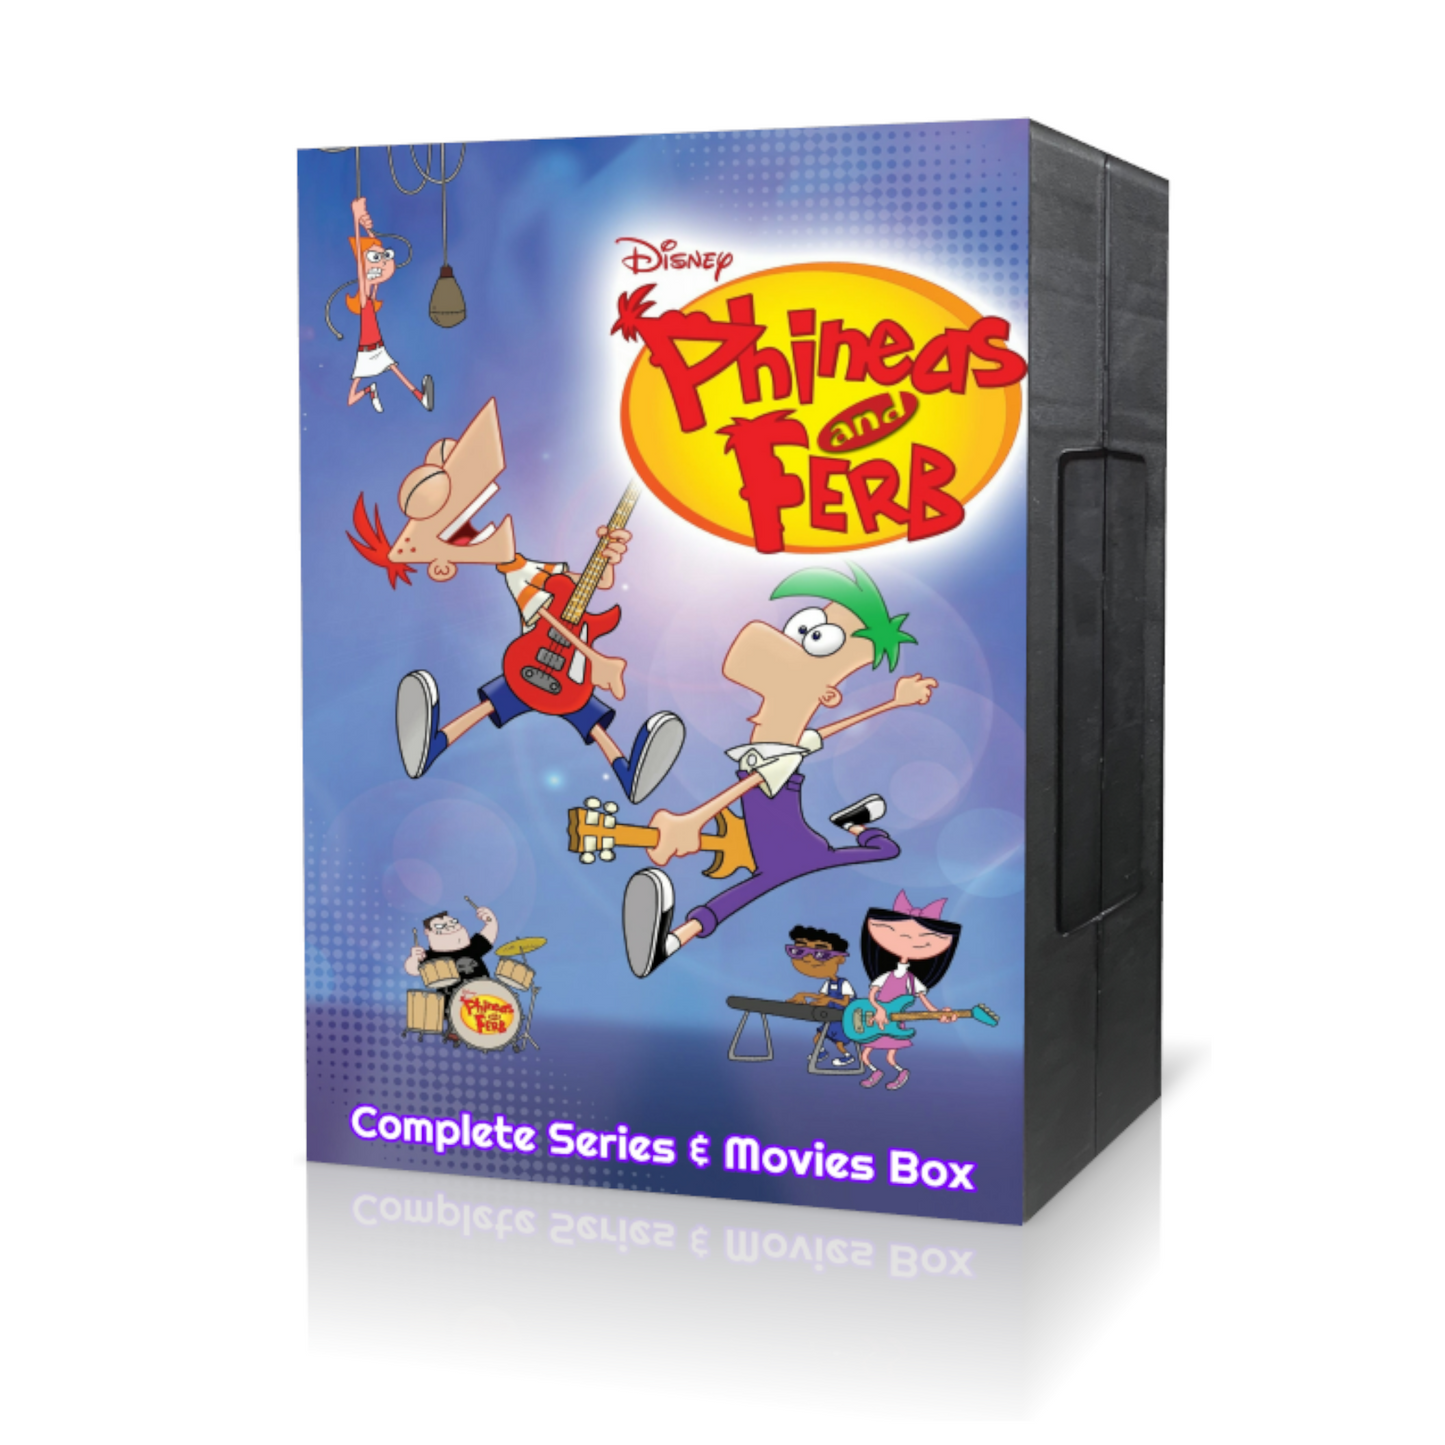 Phineas and Ferb Complete Series & Movies DVD Set - RetroAnimation 